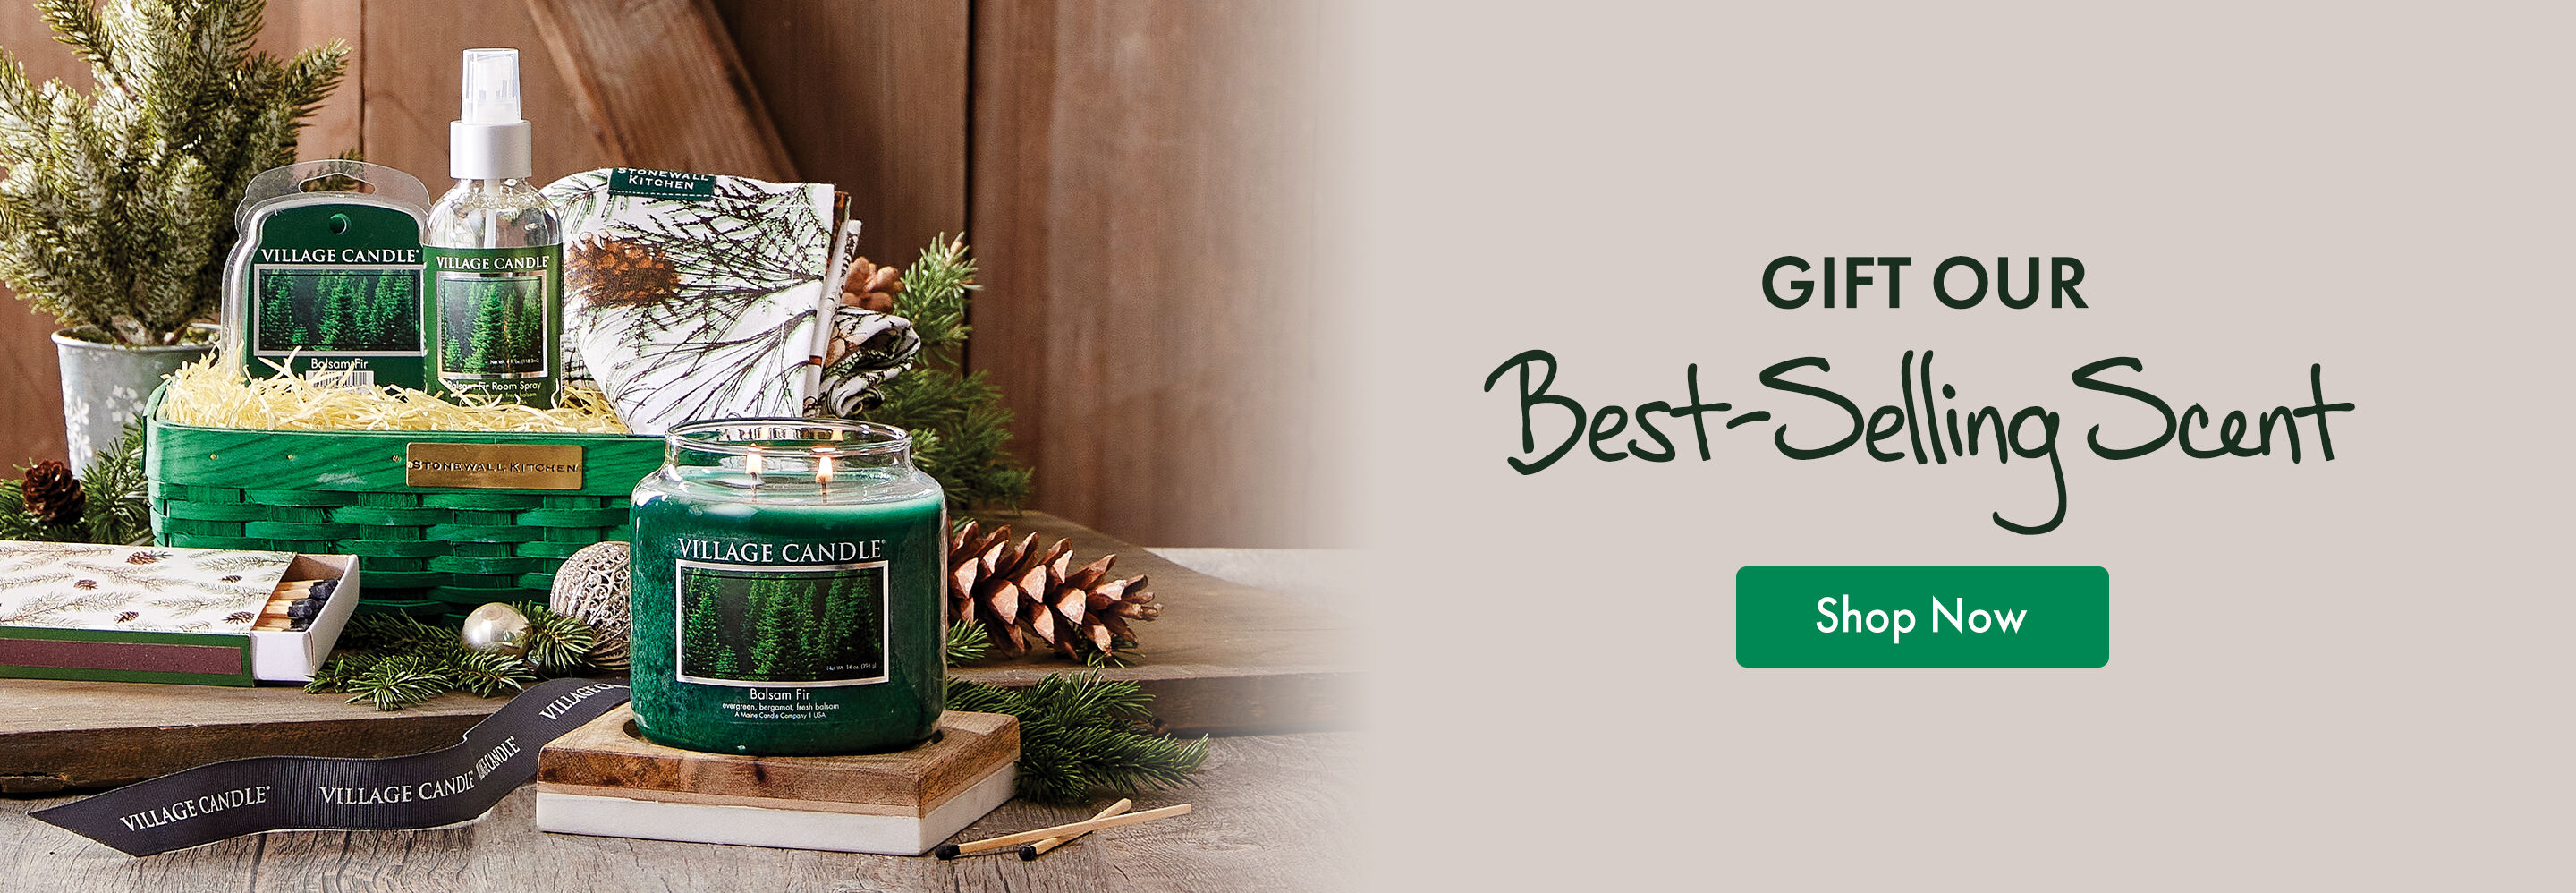 Gift Our Best-Selling Scent - Shop Now